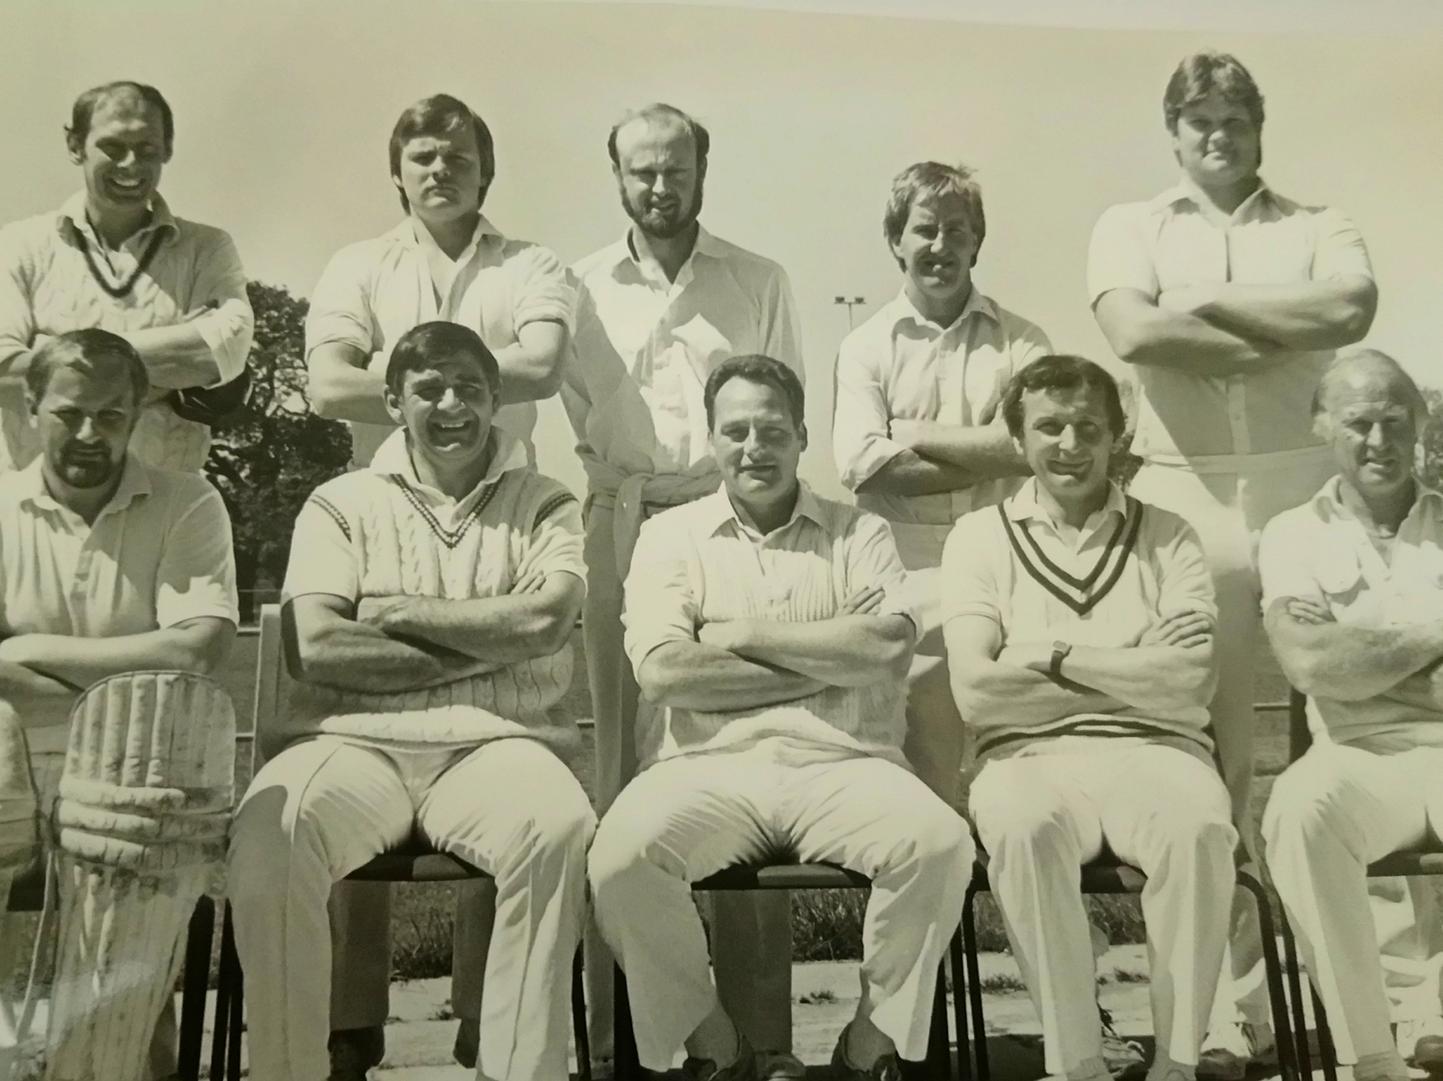 OLs pictured ahead of their match against Southam in 1985. Back: Phil Rees, Simon Hewitt, Colin Fleetwood, Dave Allen, Steve McGee. Front: Colin Brown, Mervyn Williamson, Fre Bennett, Tony Gosling, Joe Hatton.